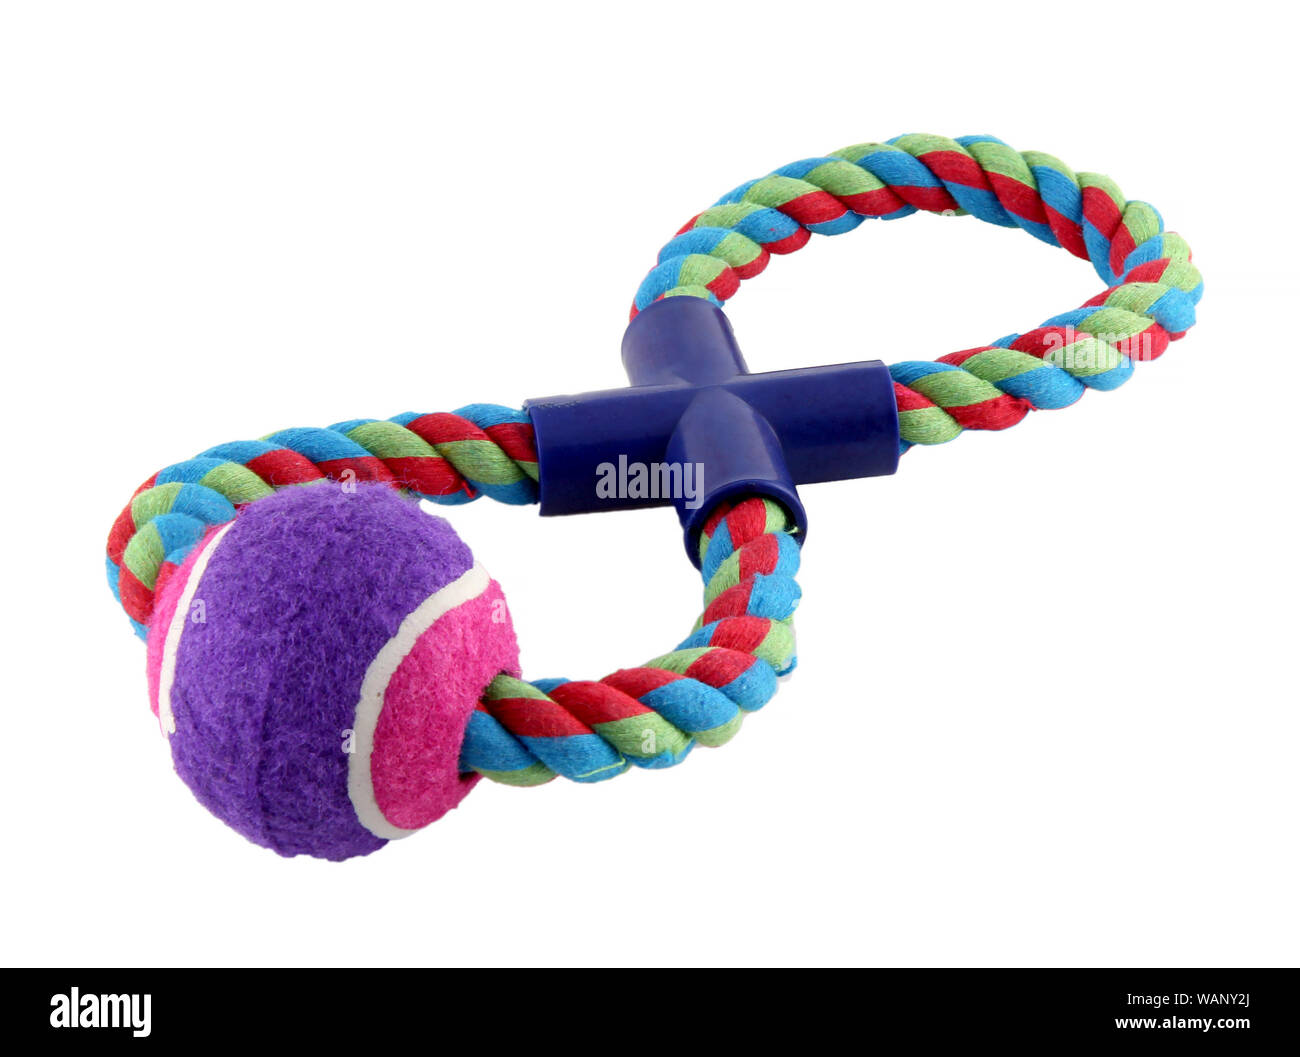 It's a pink tennis ball on a rope. It's for playing with a dog and dragging. Have fun with your dog. Stock Photo